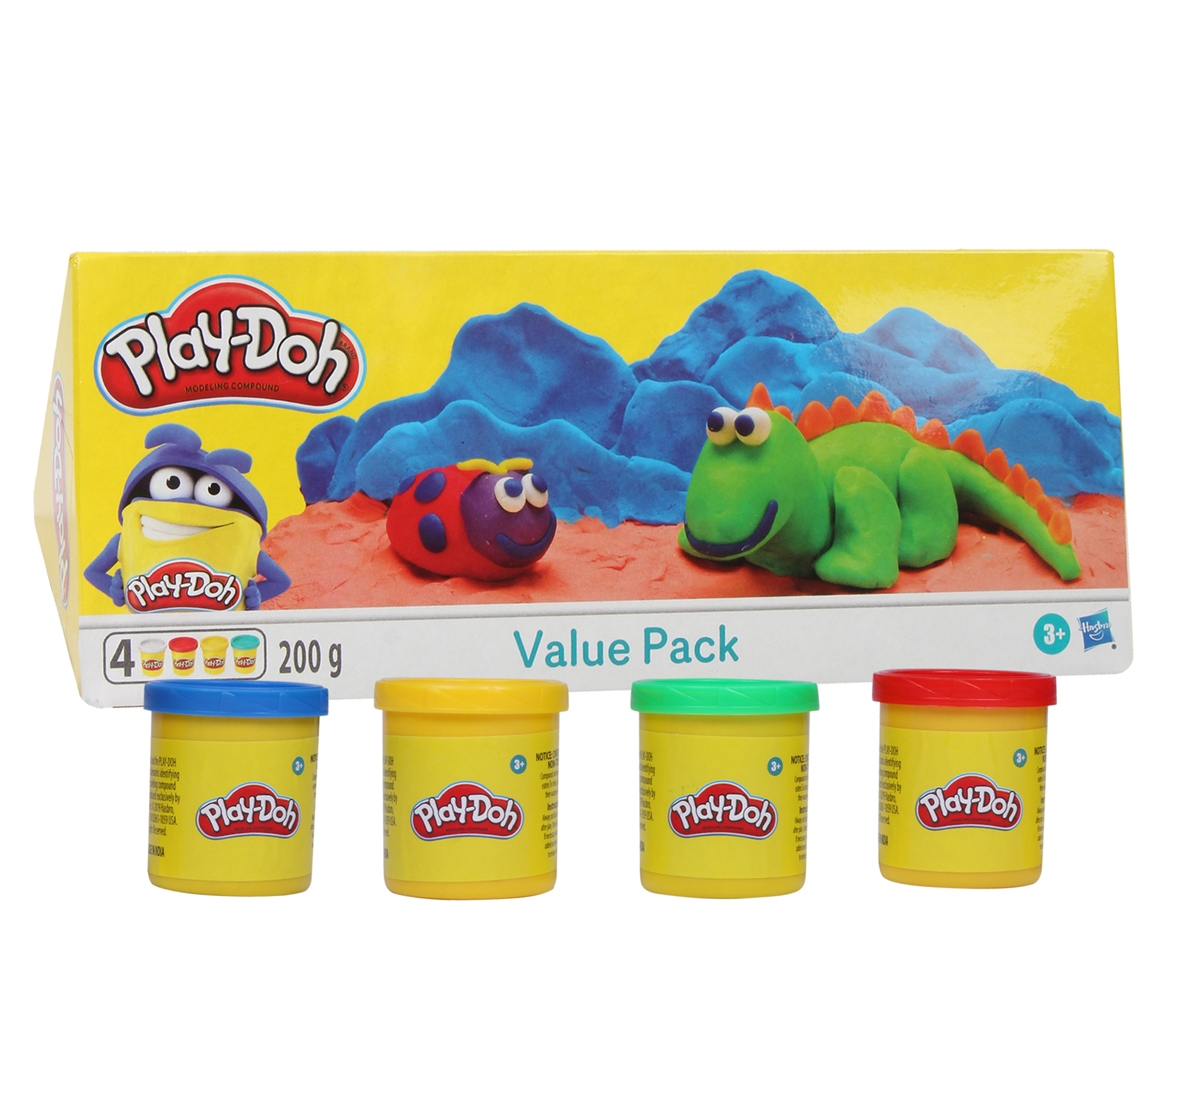 Play-Doh | Play Doh Value Pack of 4 with 2 Ounce Cans for kids 3Y+, Multicolour